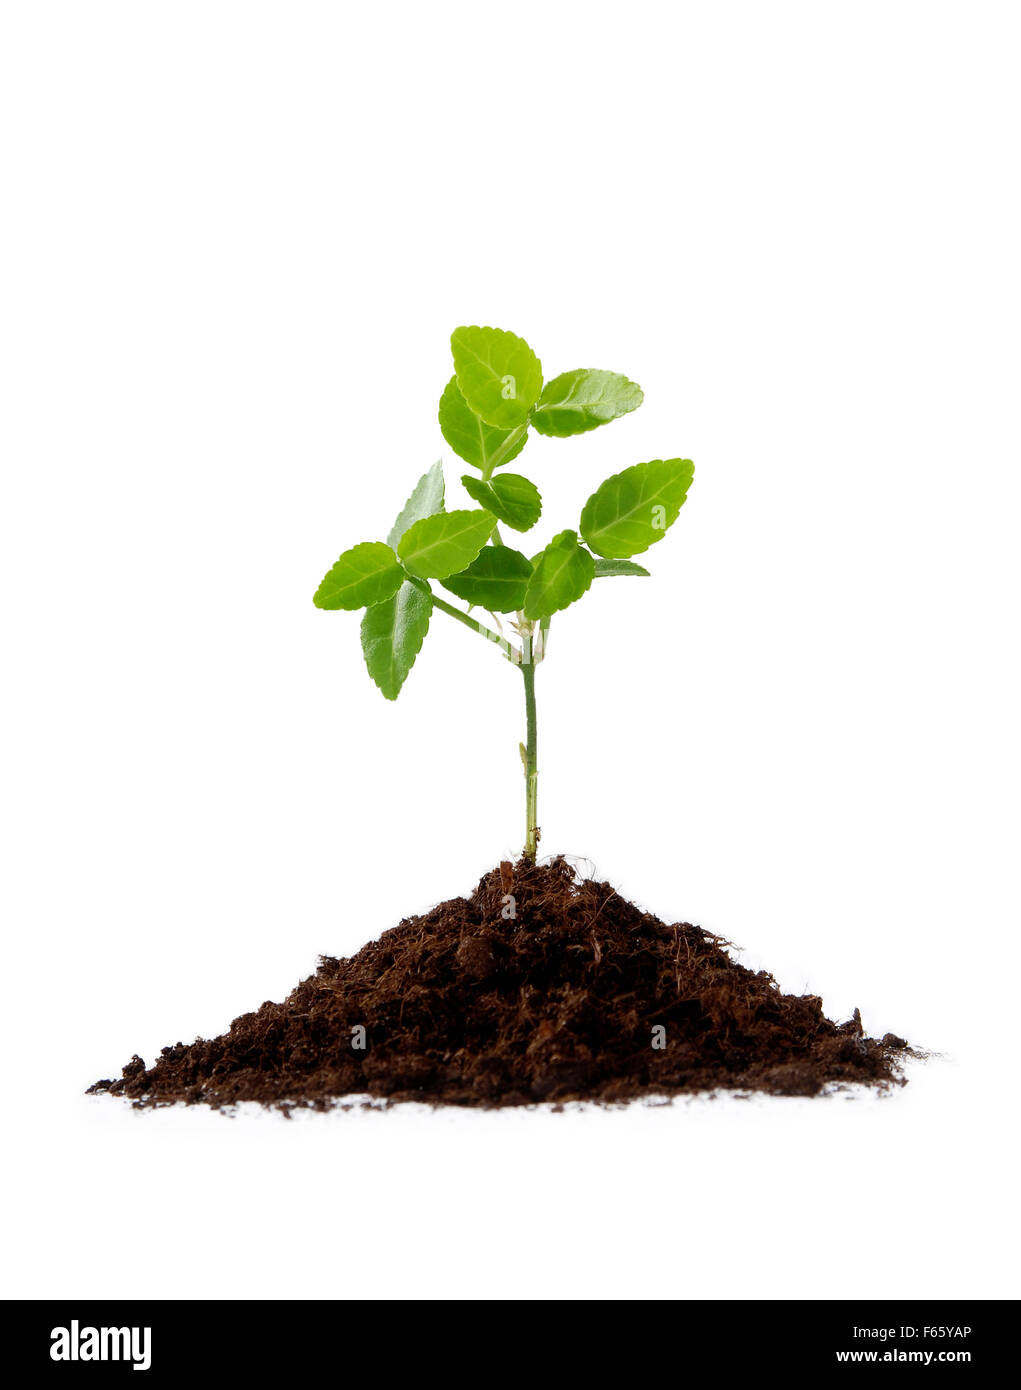 Small green plant with soil Stock Photo